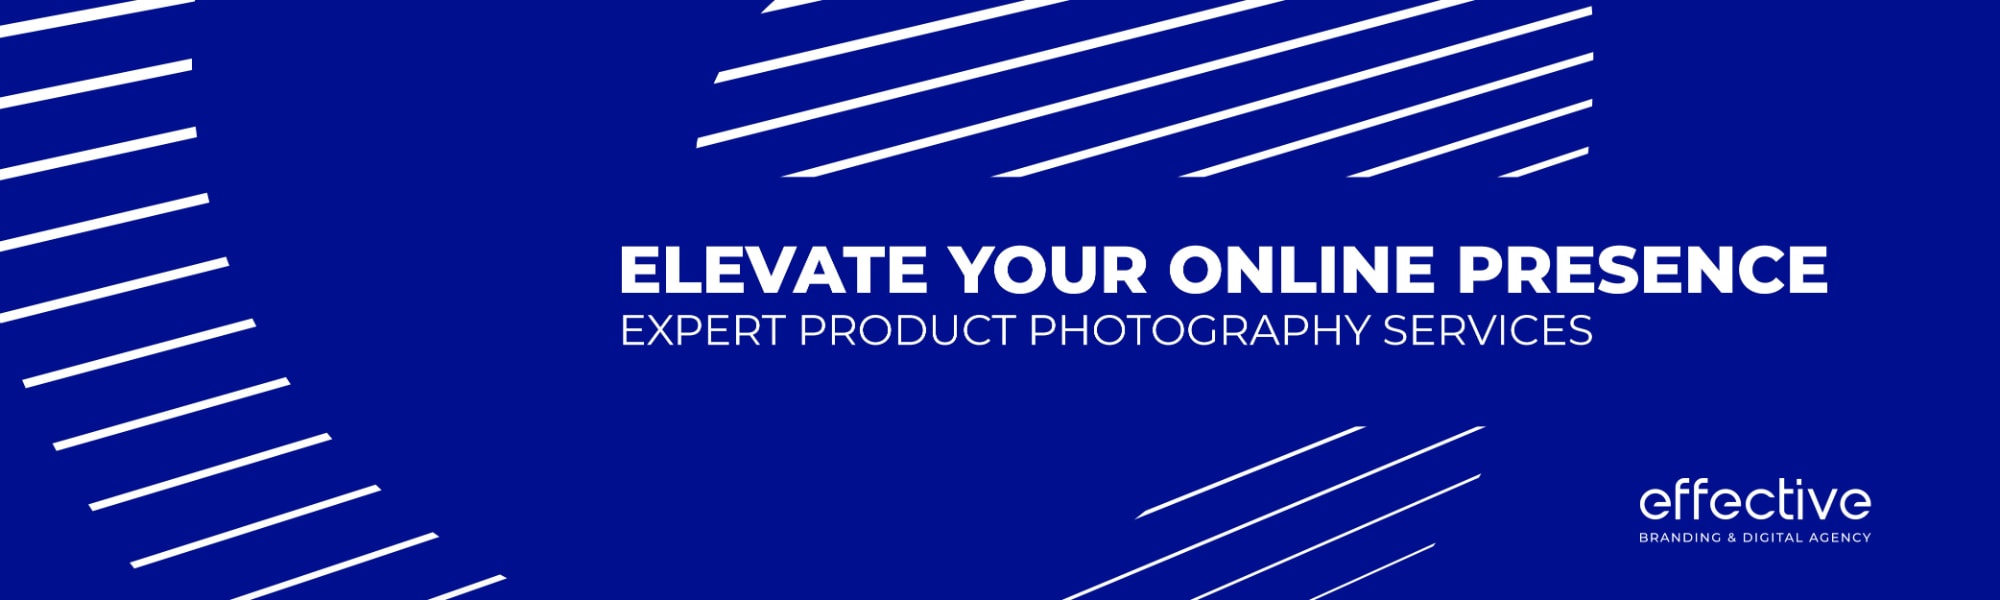 Elevate Your Online Presence Expert Product Photography Services